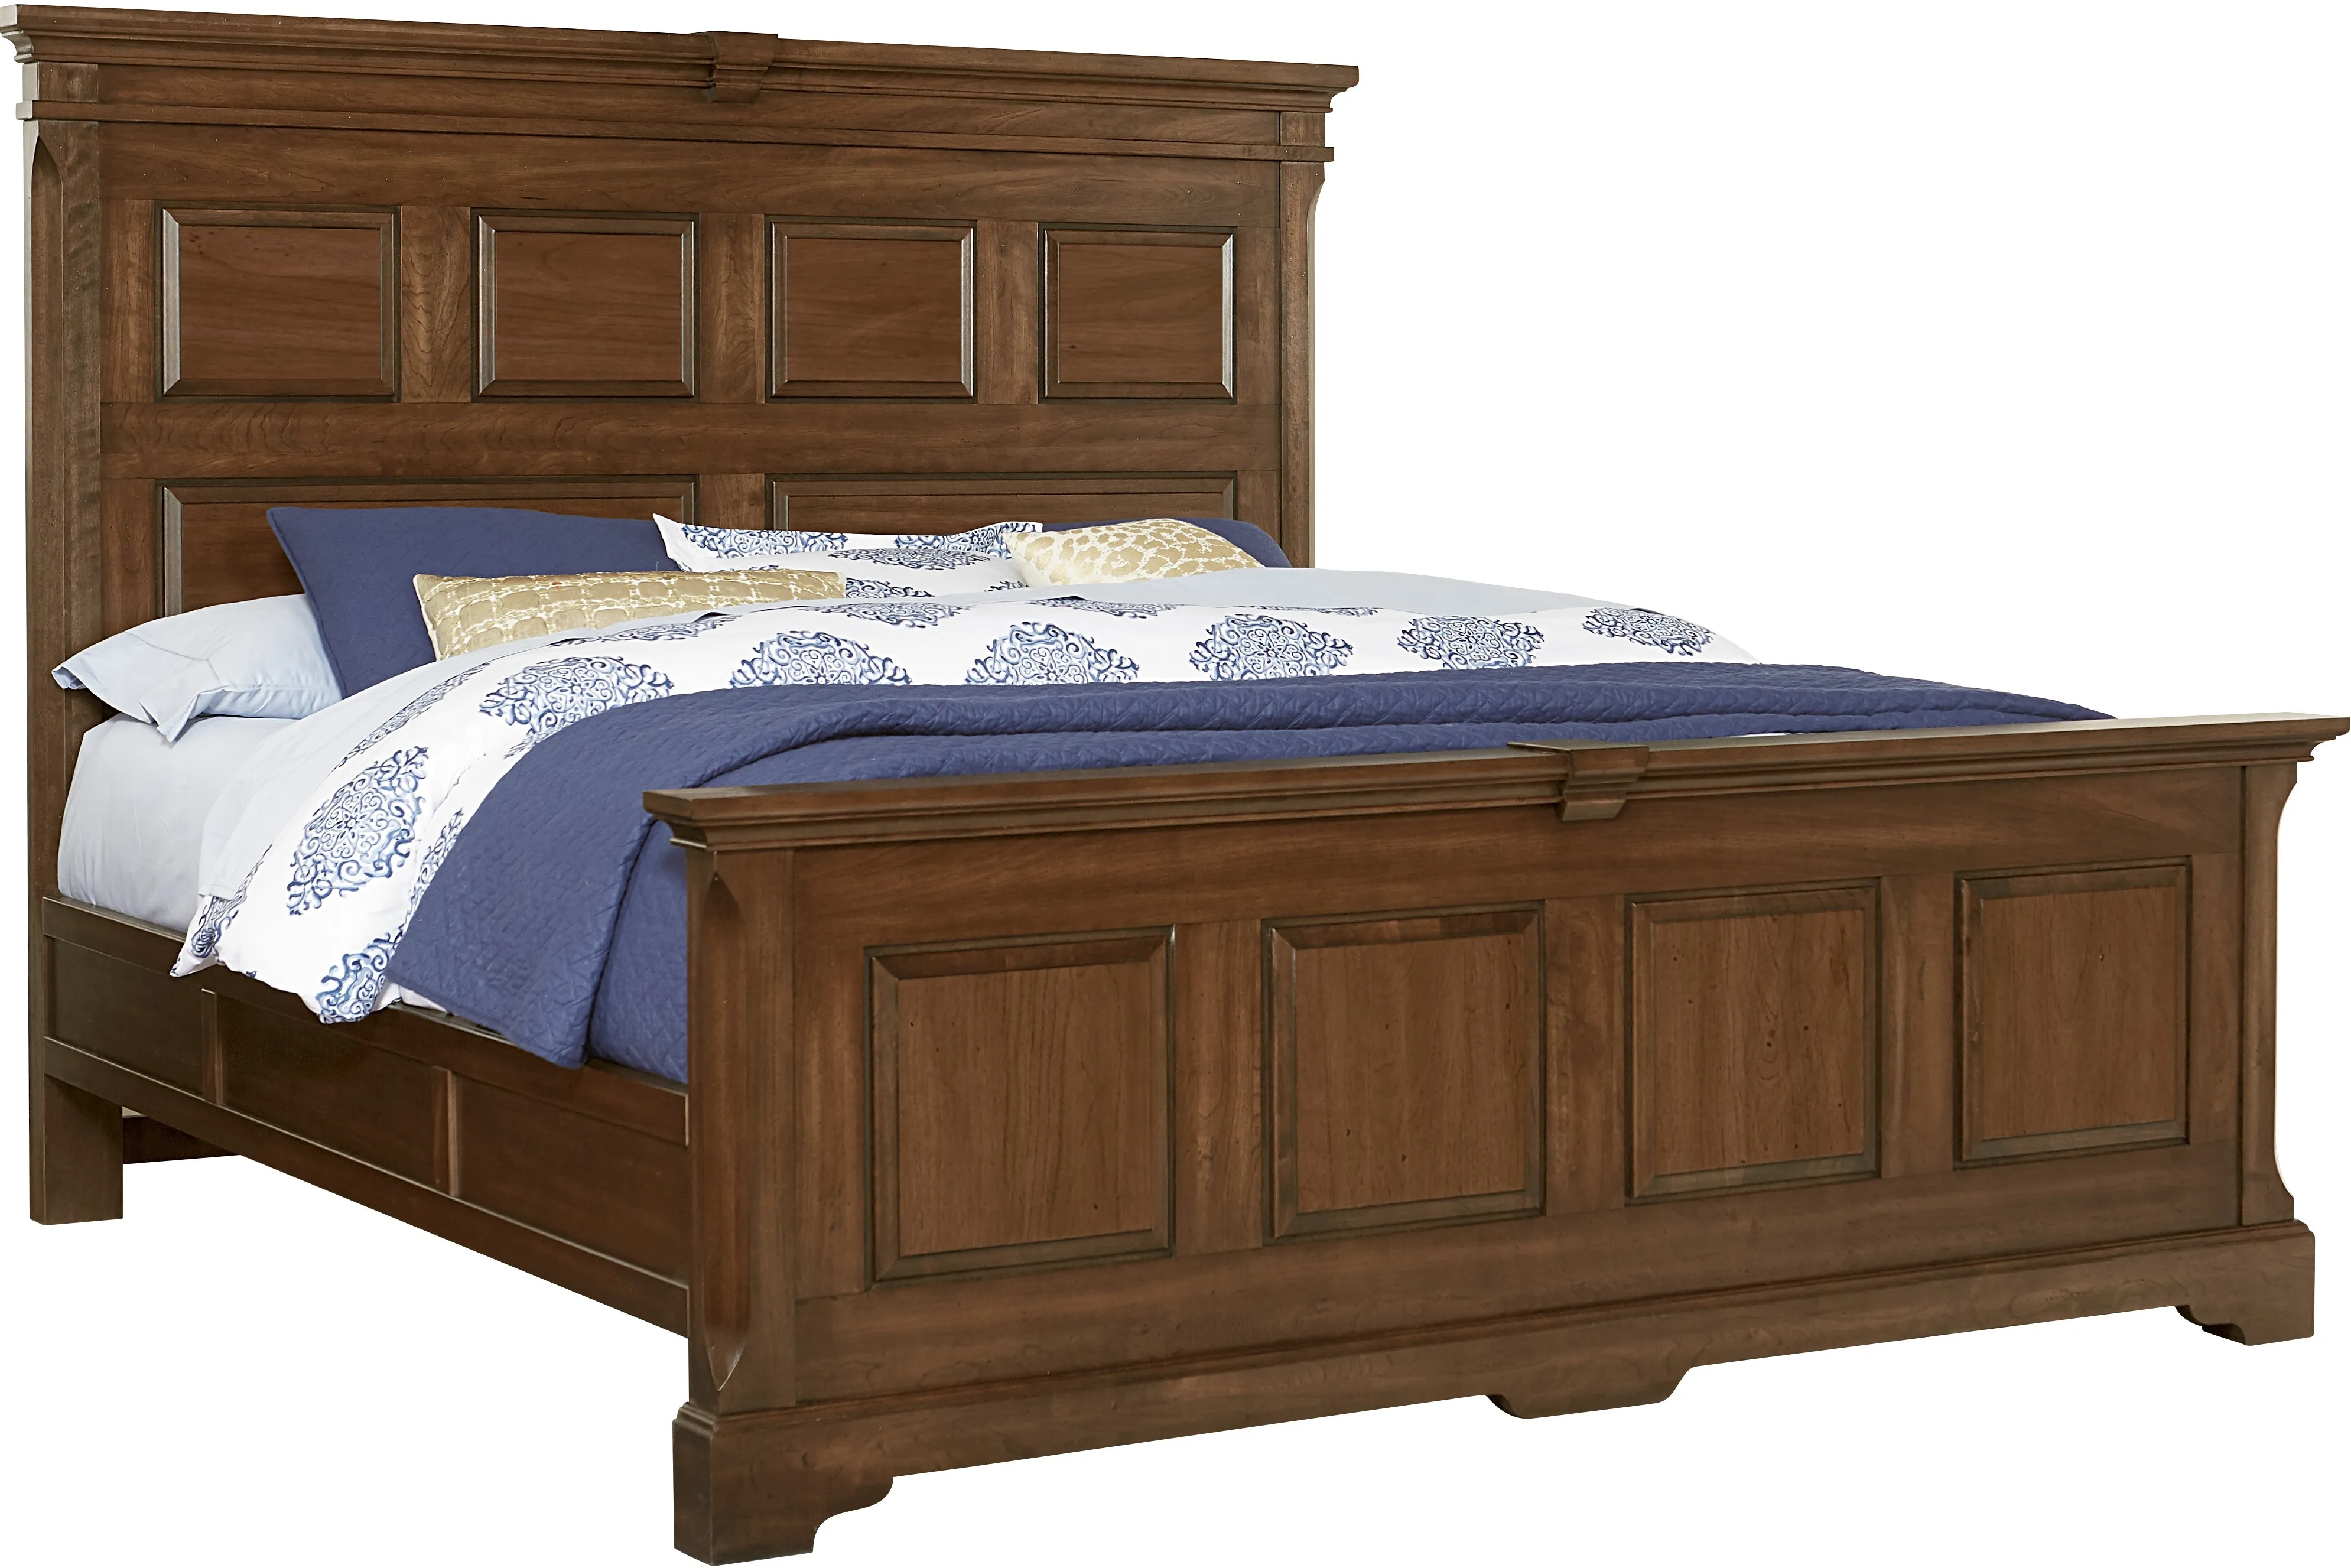 Artisan & Post by Vaughan-Bassett Heritage King Mansion Bed